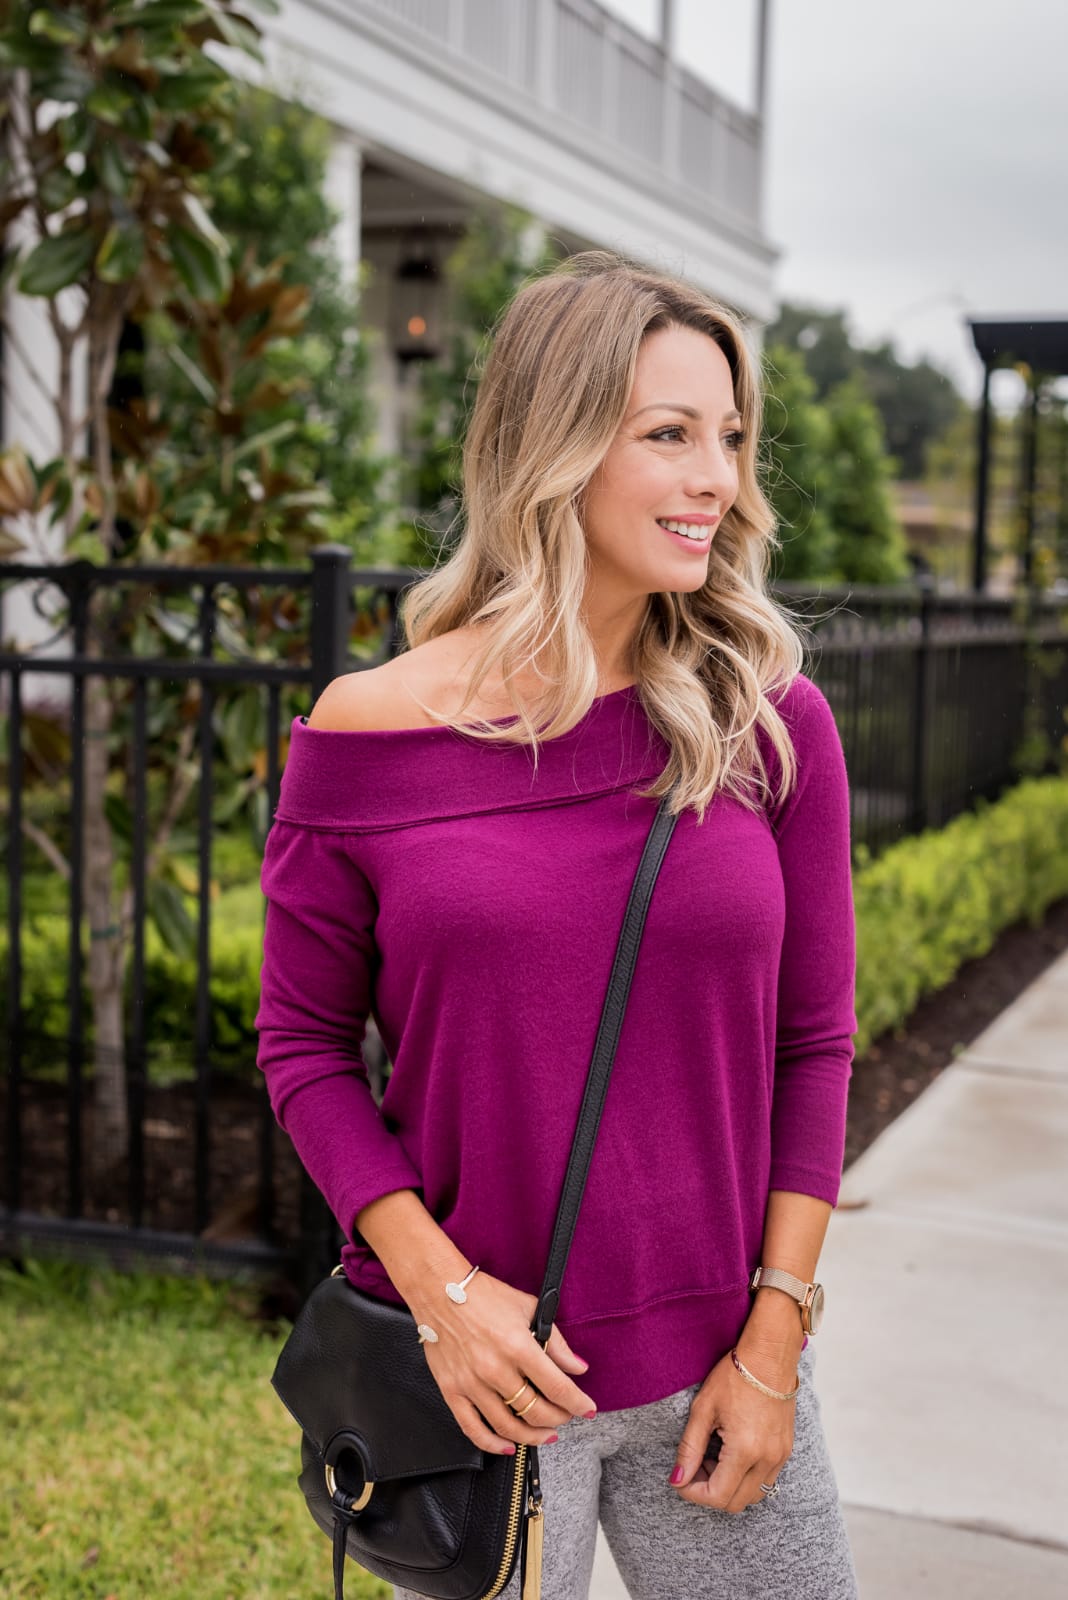 Cozy Fall Outfit Inspiration -Gibson joggers and off shoulder top (3)